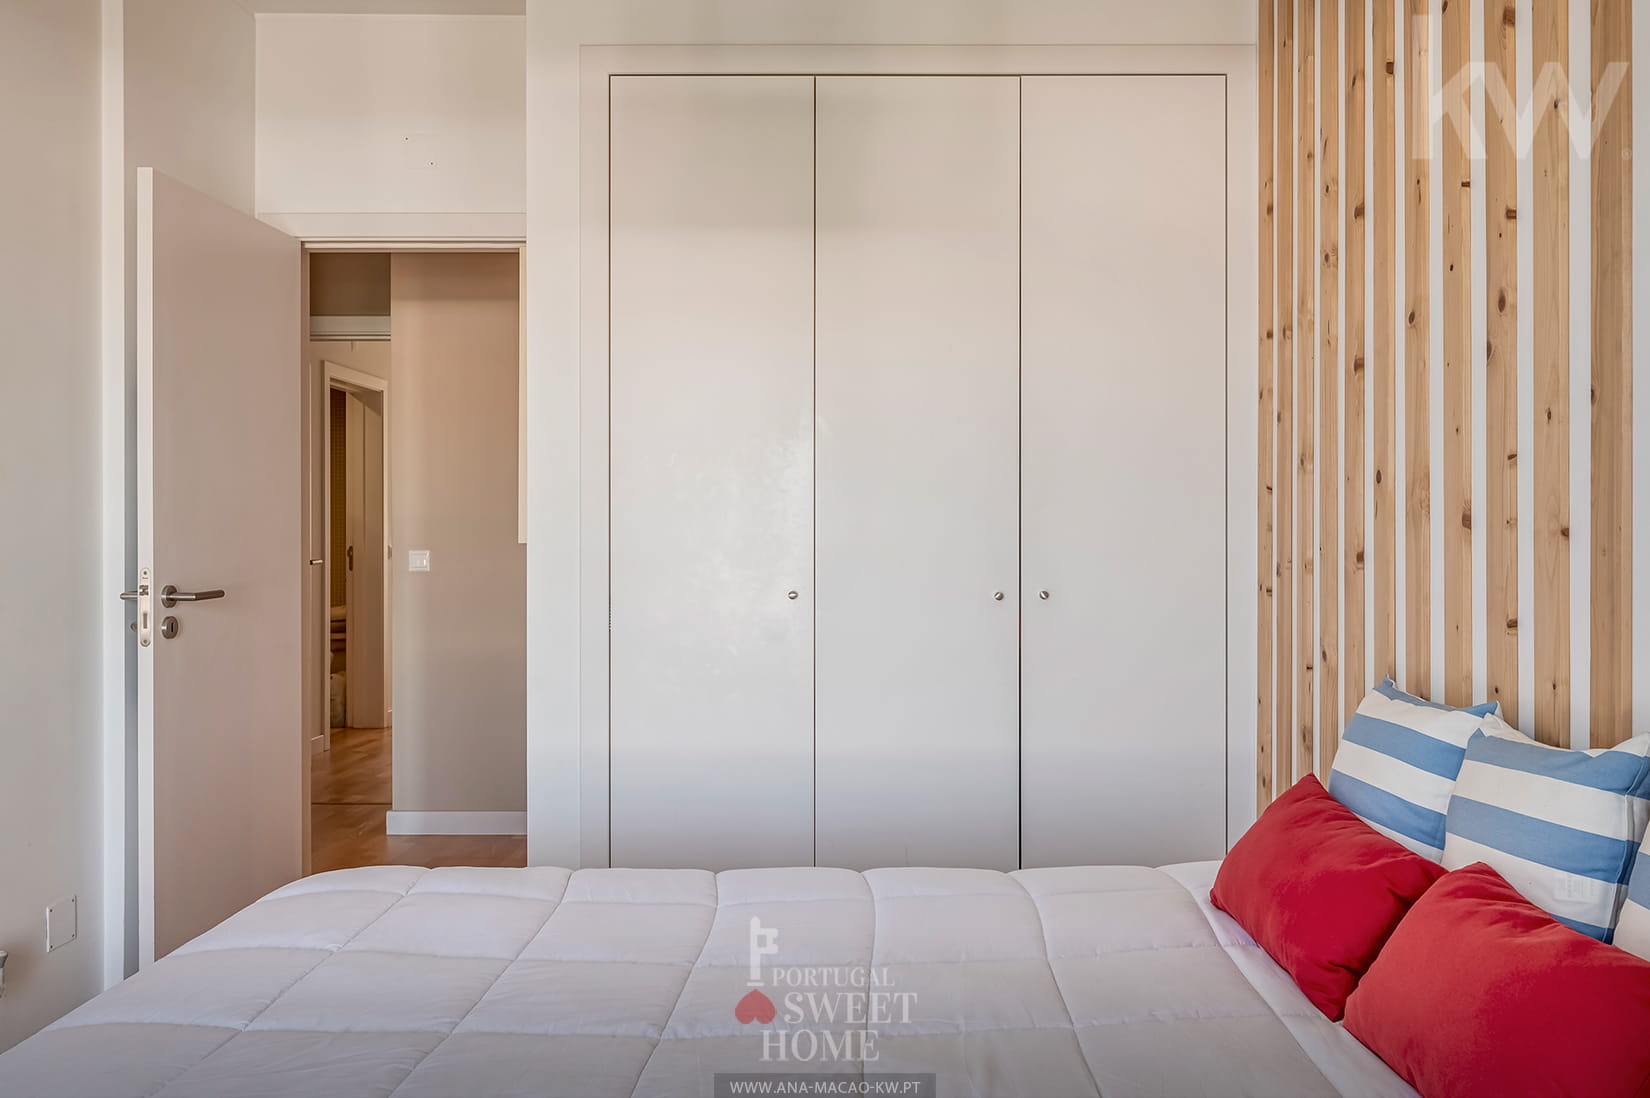 Bedroom with wardrobes and balcony (12.60 m2)